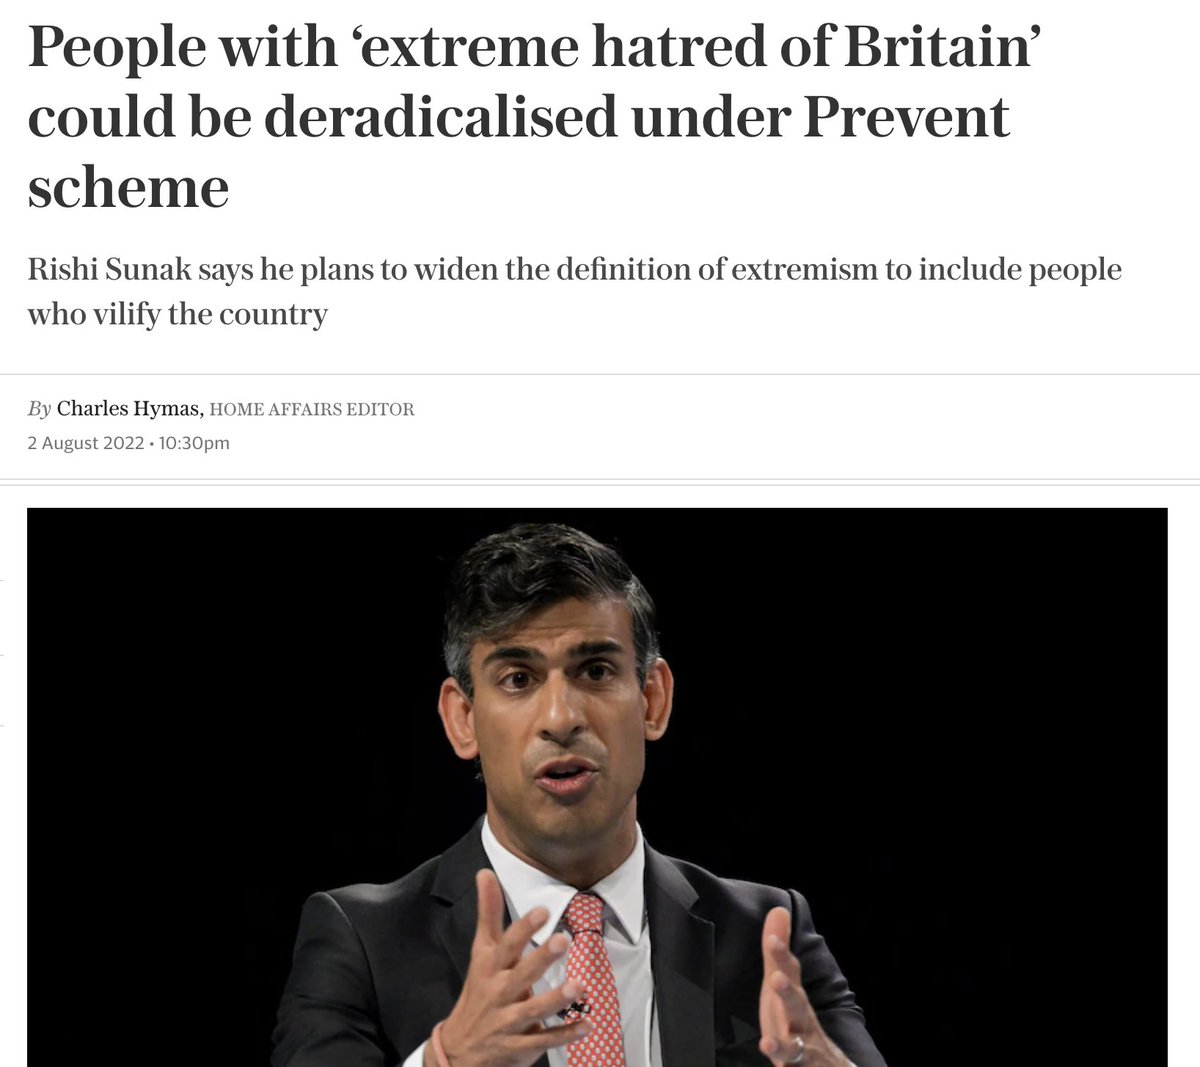 I read this article so you don't have to!
I'm an expert on UK counterterrorism so let's deconstruct it together to see how appalling and dangerous this is.

(It was on the Telegraph and no I'm not linking to it.)

🧵
1/